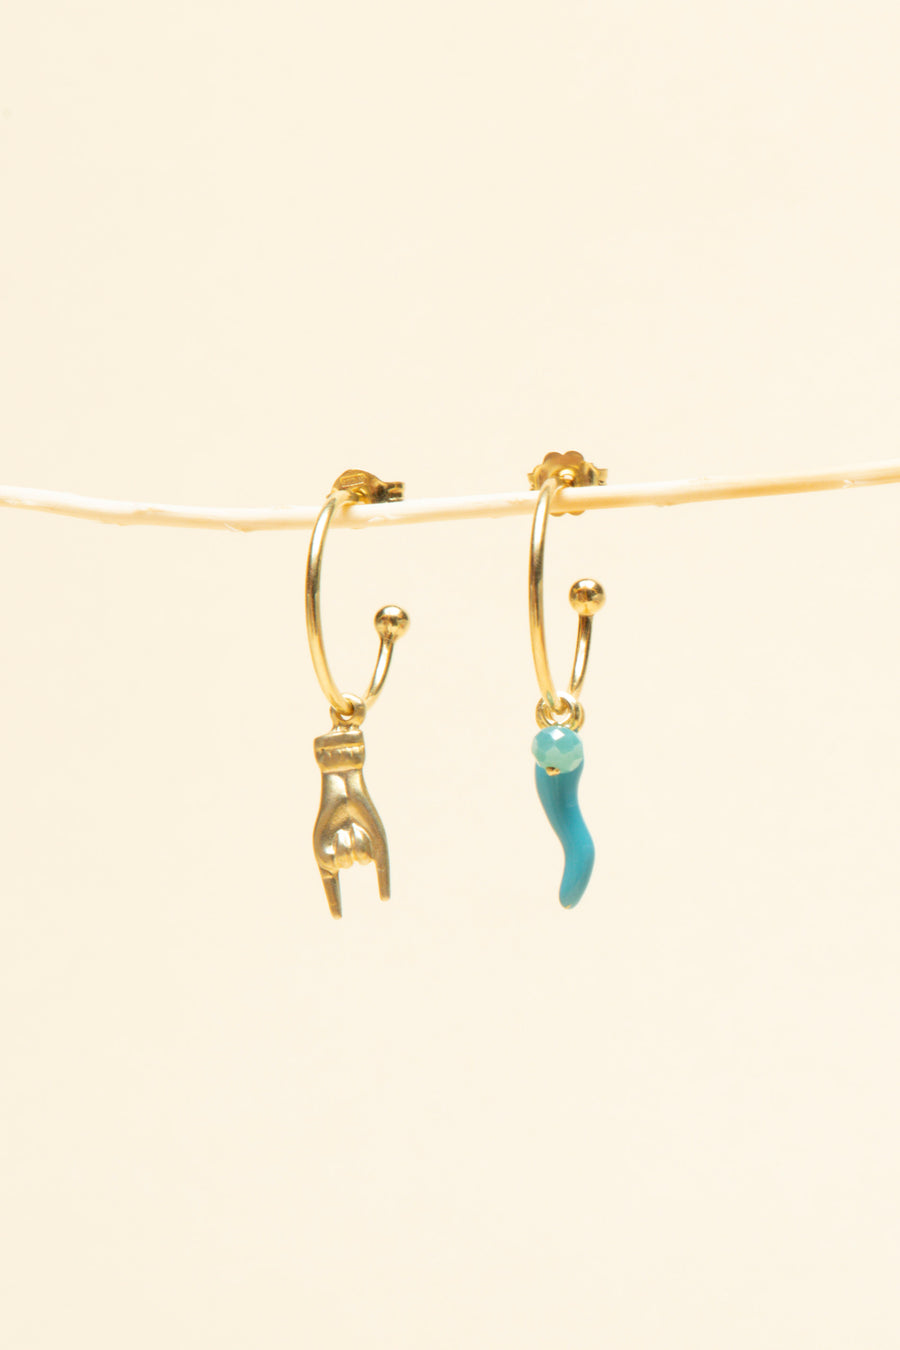 Create your own earrings